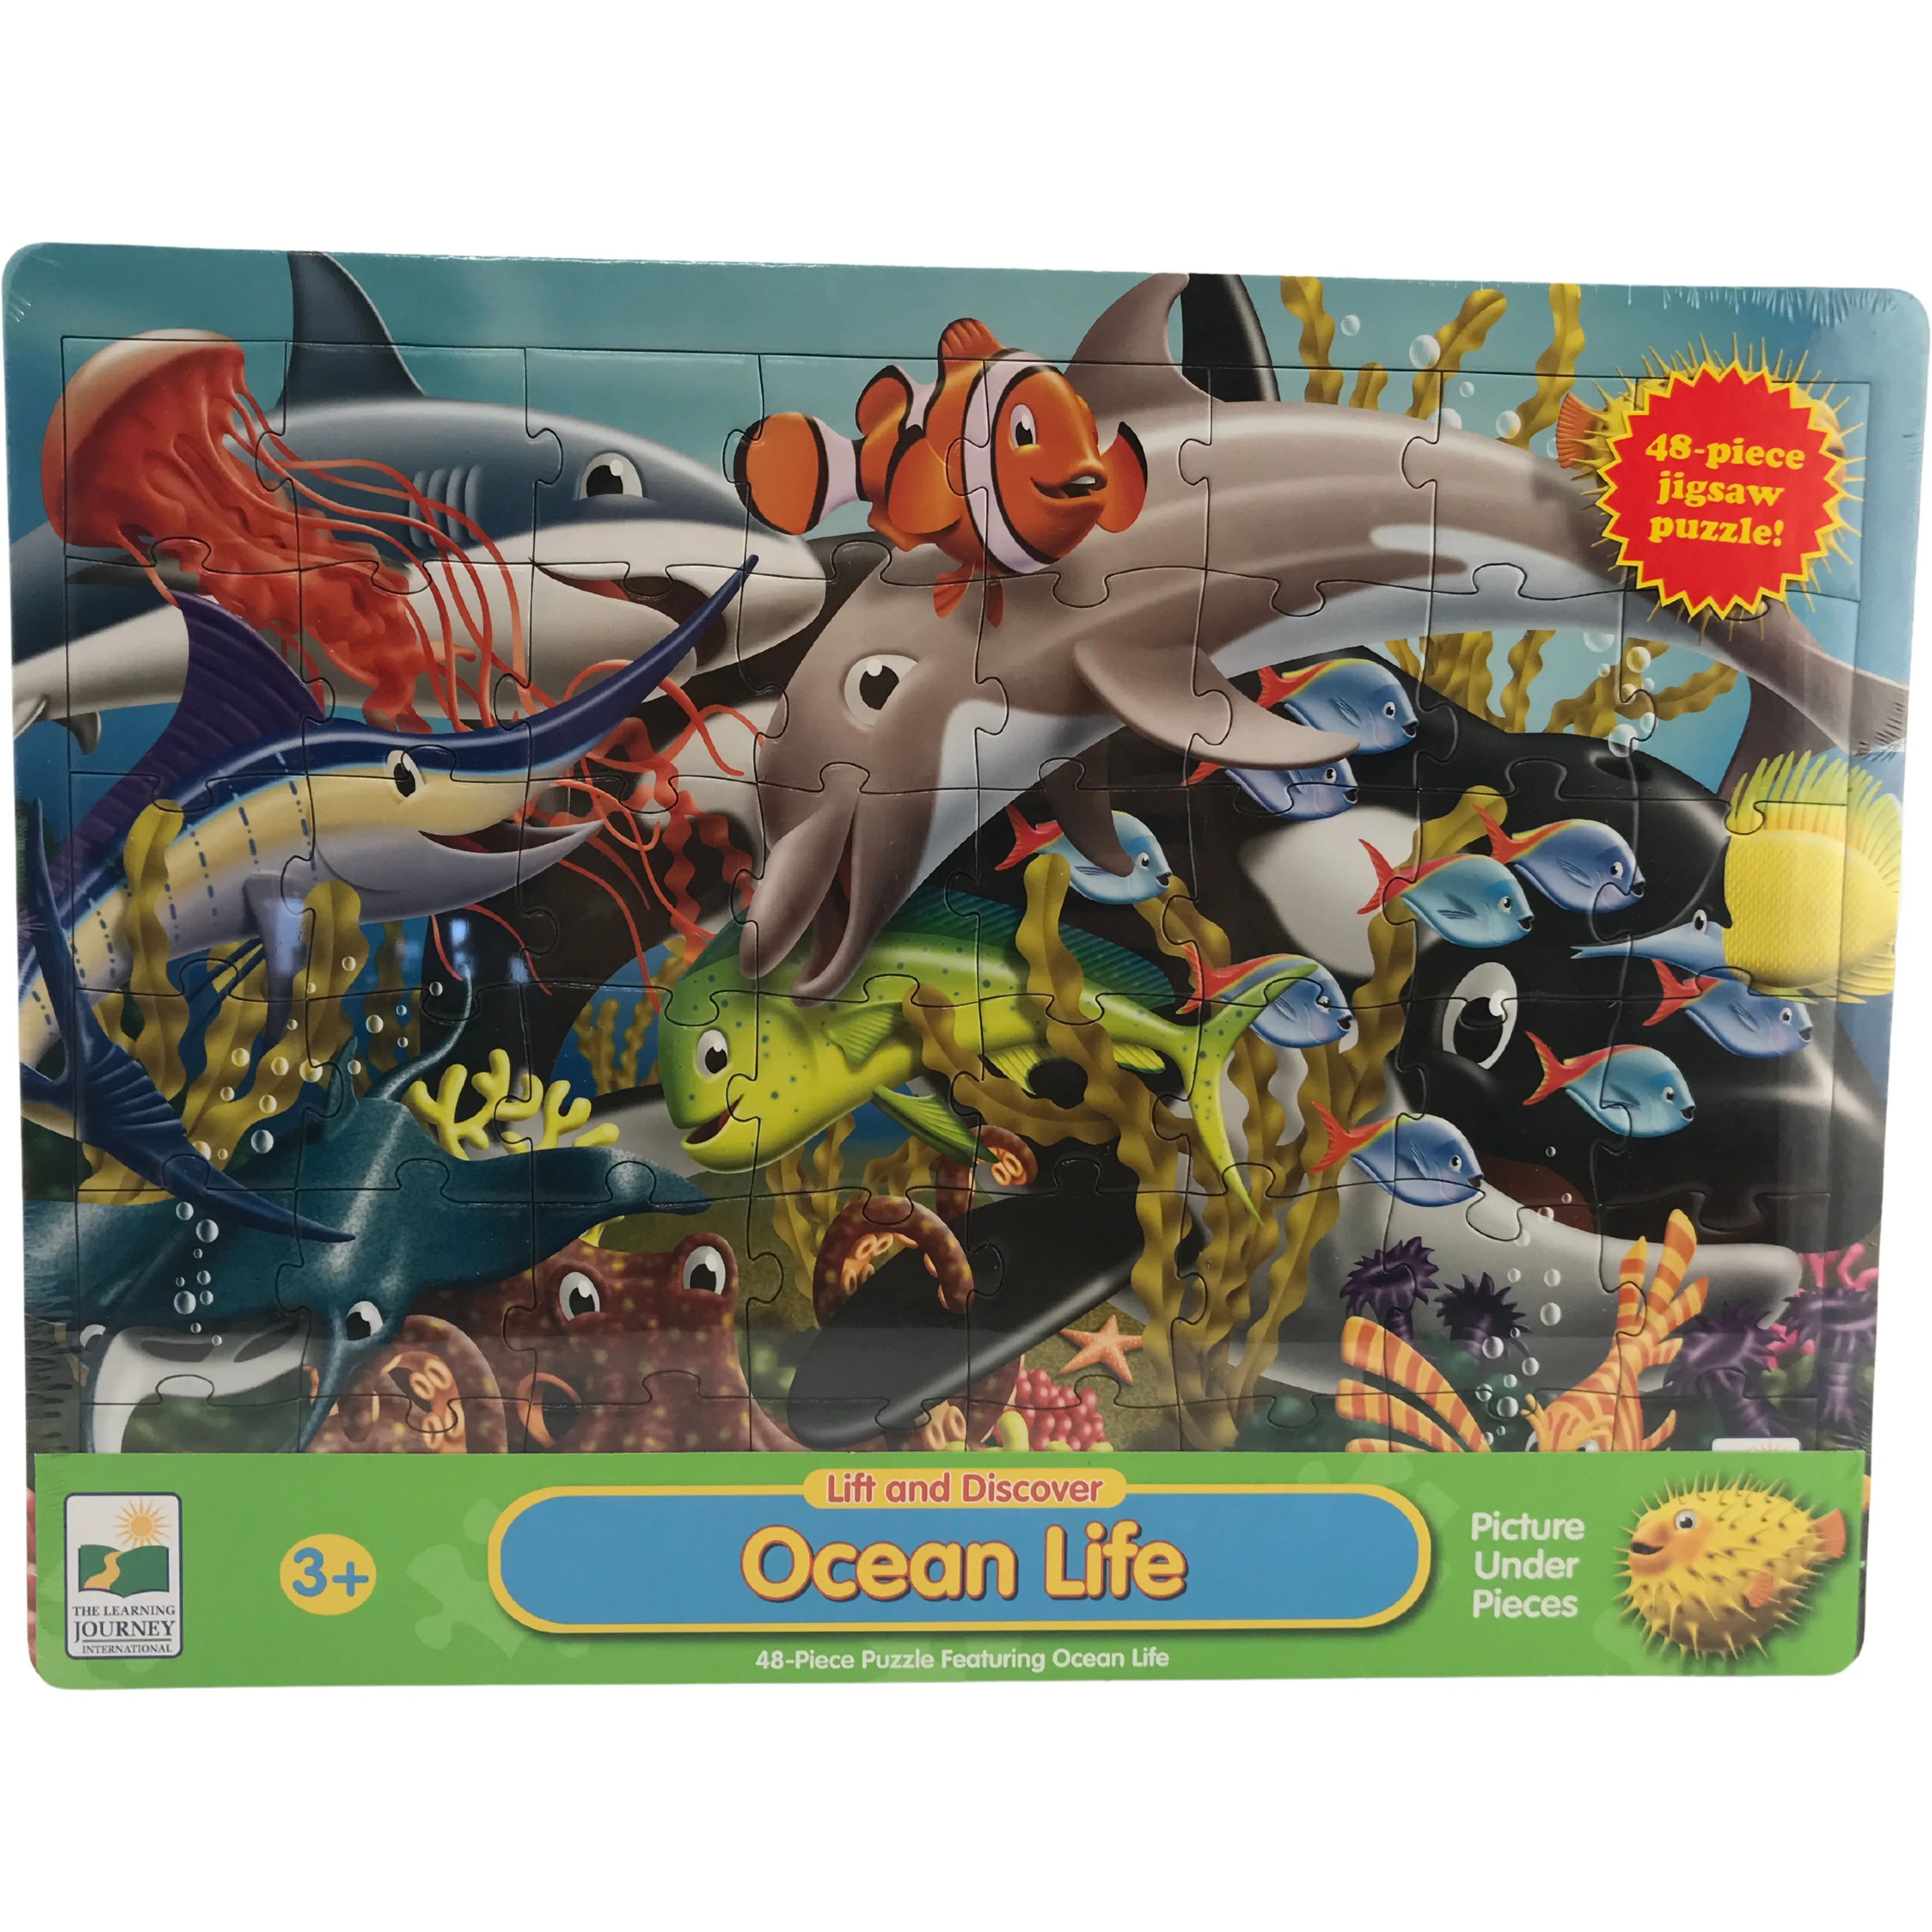 The Learning Journey Ocean Life Puzzle / 48 Piece Jigsaw Puzzle / Ocean Picture